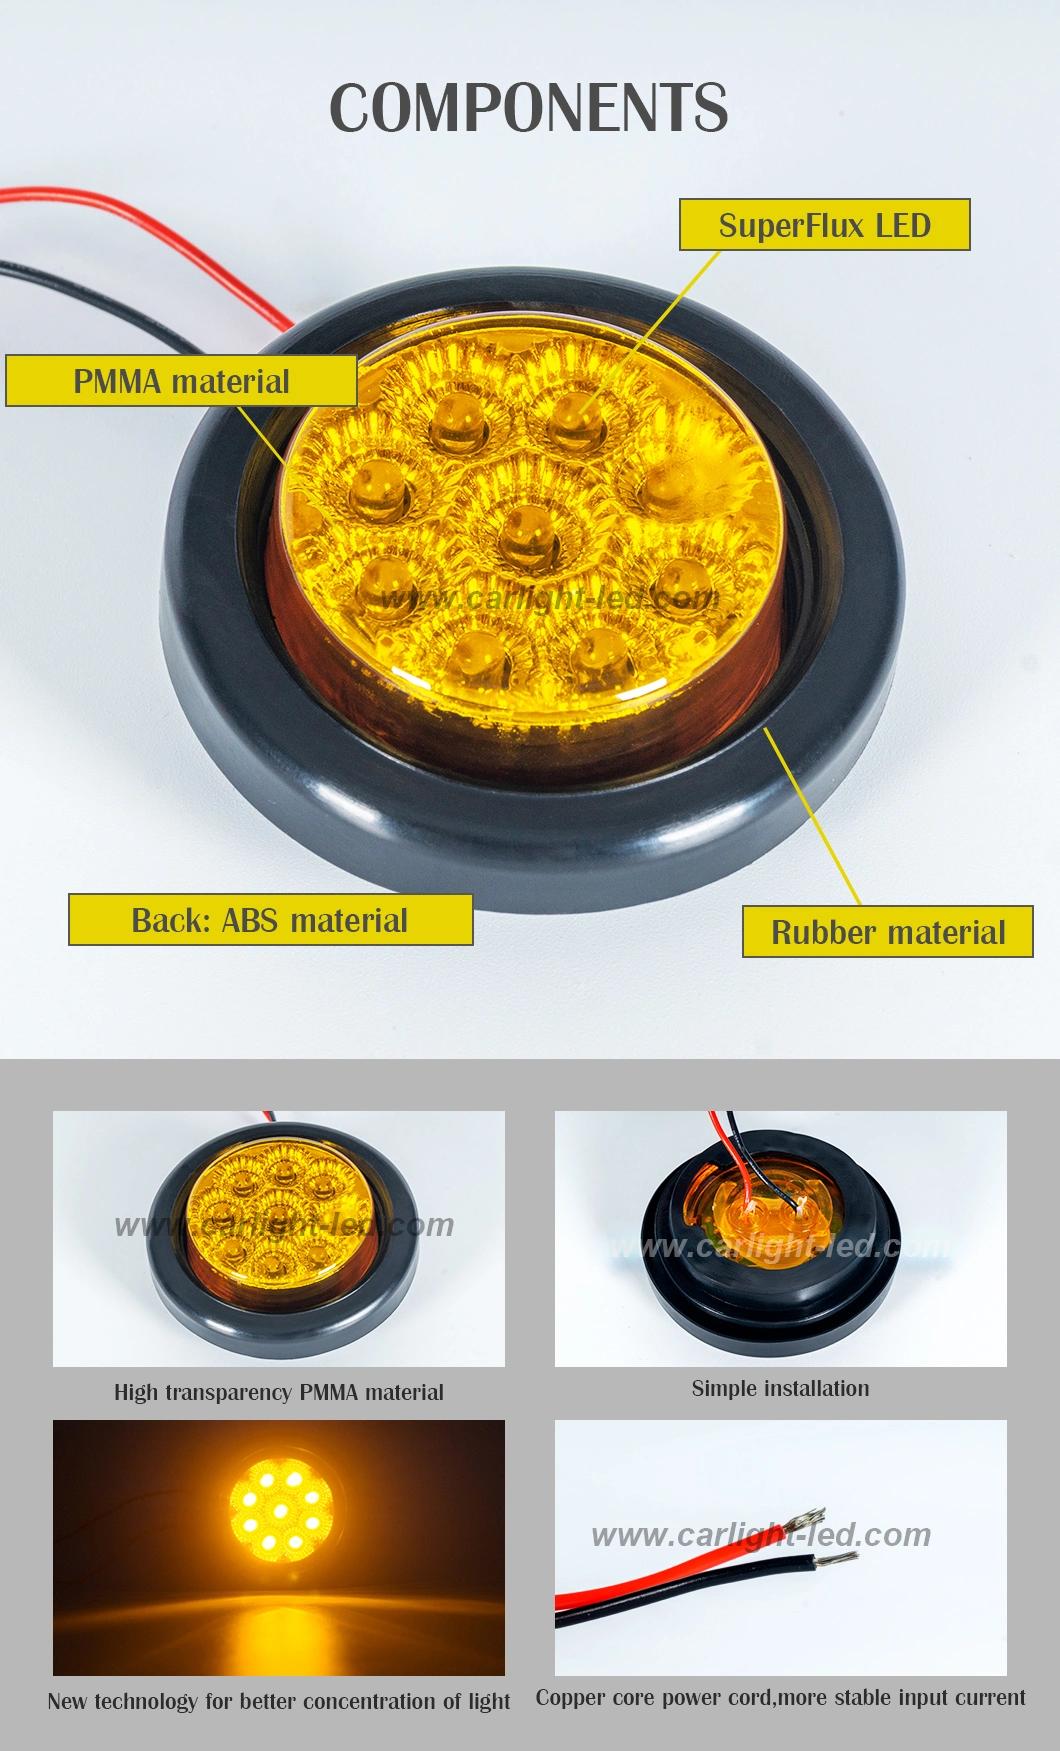 2 Inch Amber LED Truck Tail Light